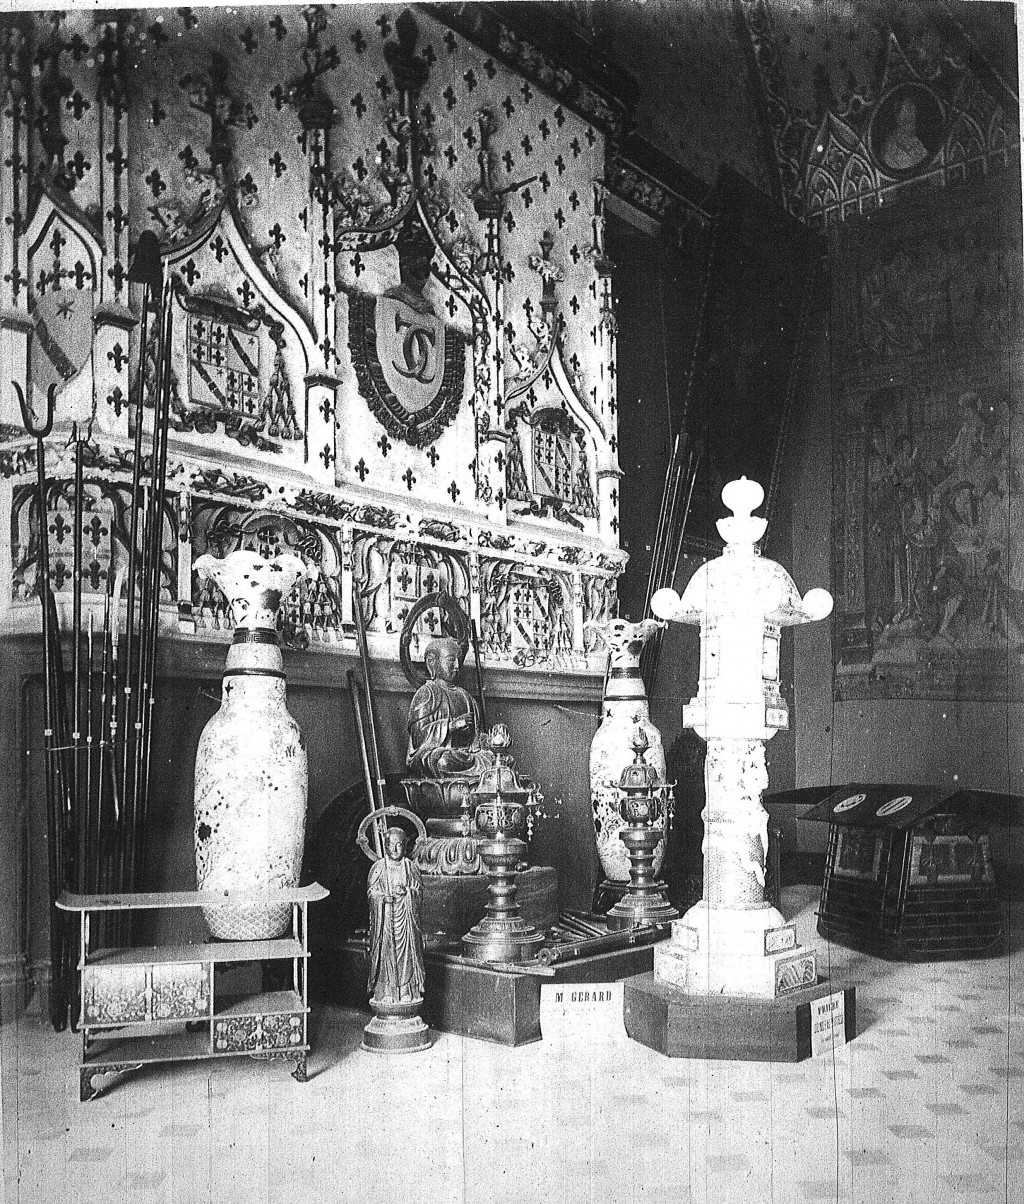 Black and white photograph of an interior decorated with Asian objects.